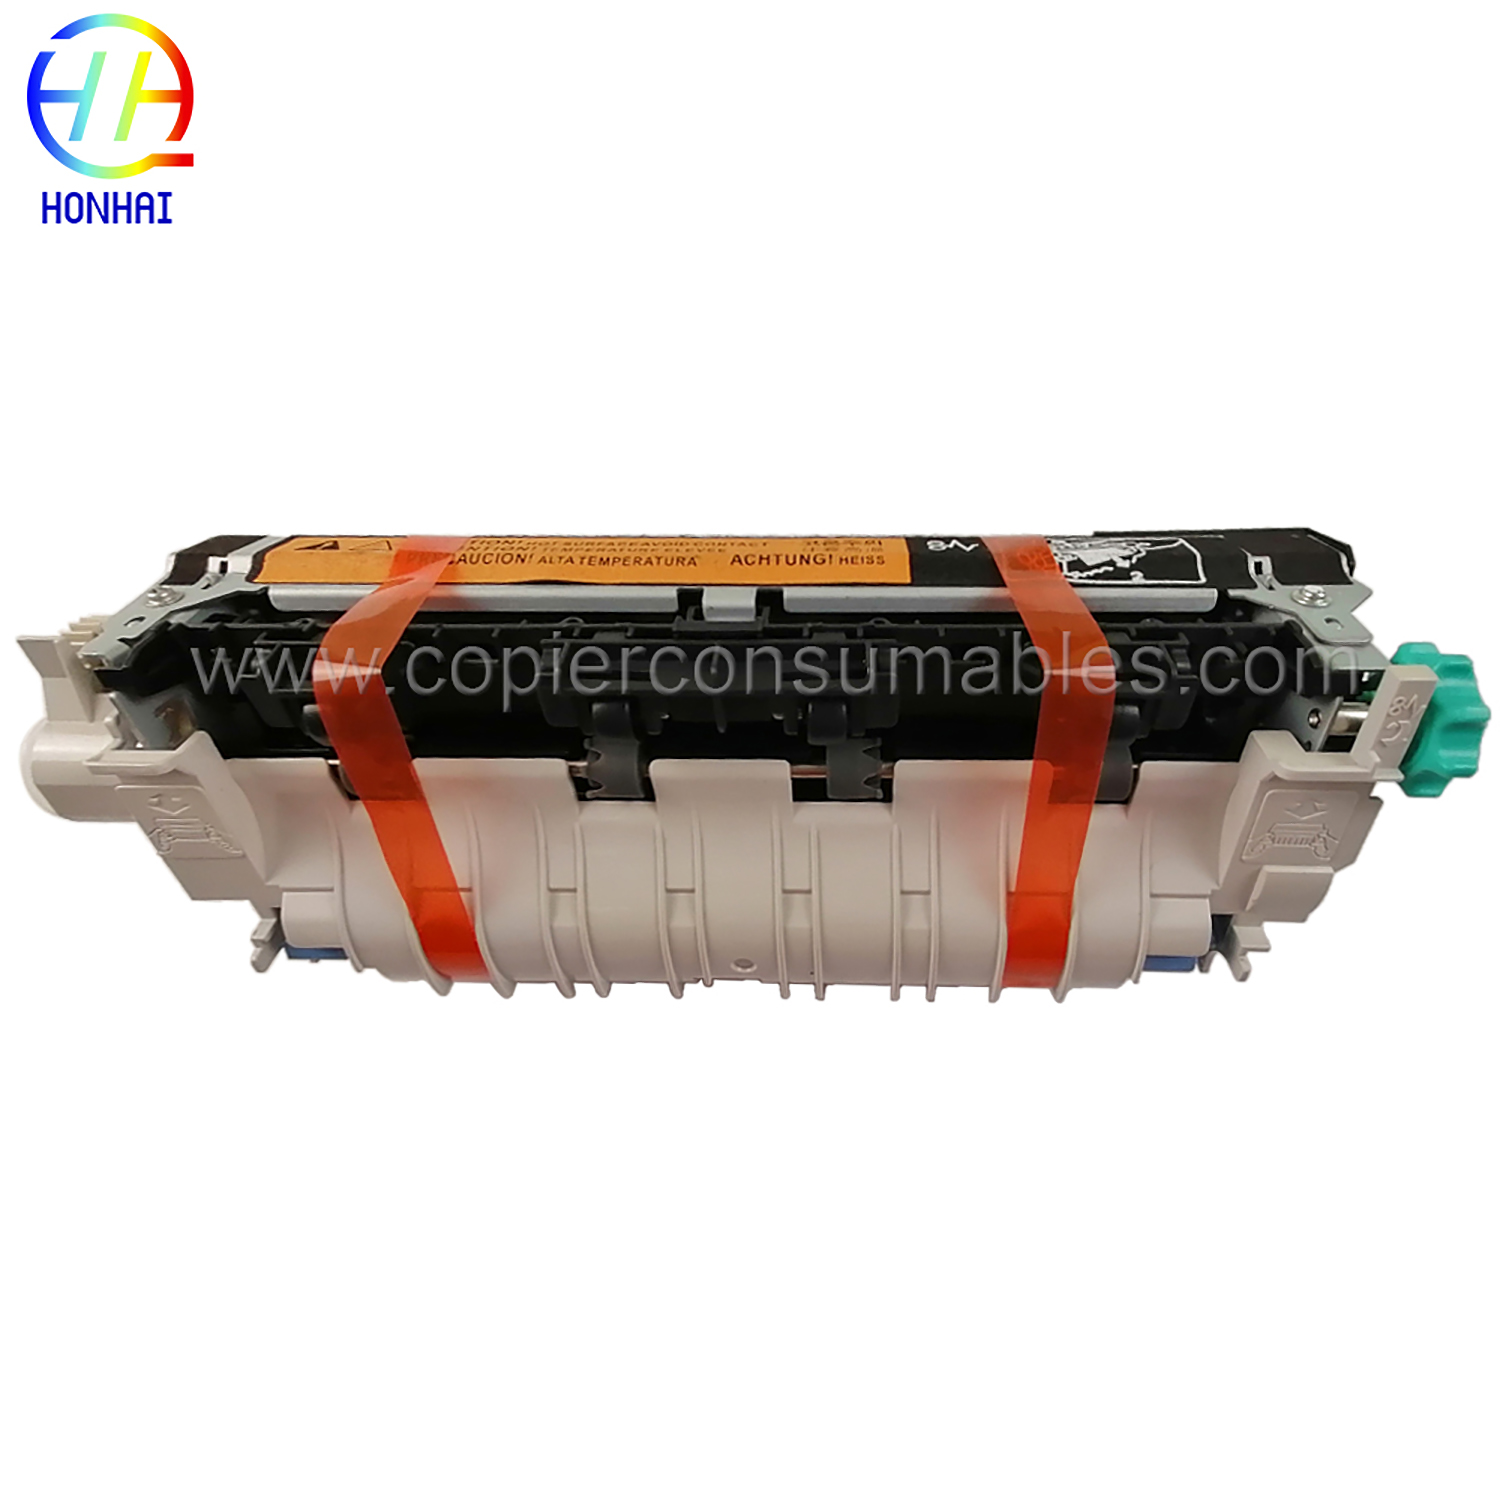 HP M4345 M4349 HP-RM1-1044 (1) for ئۈچۈن Fuser بىرلىكى 220v